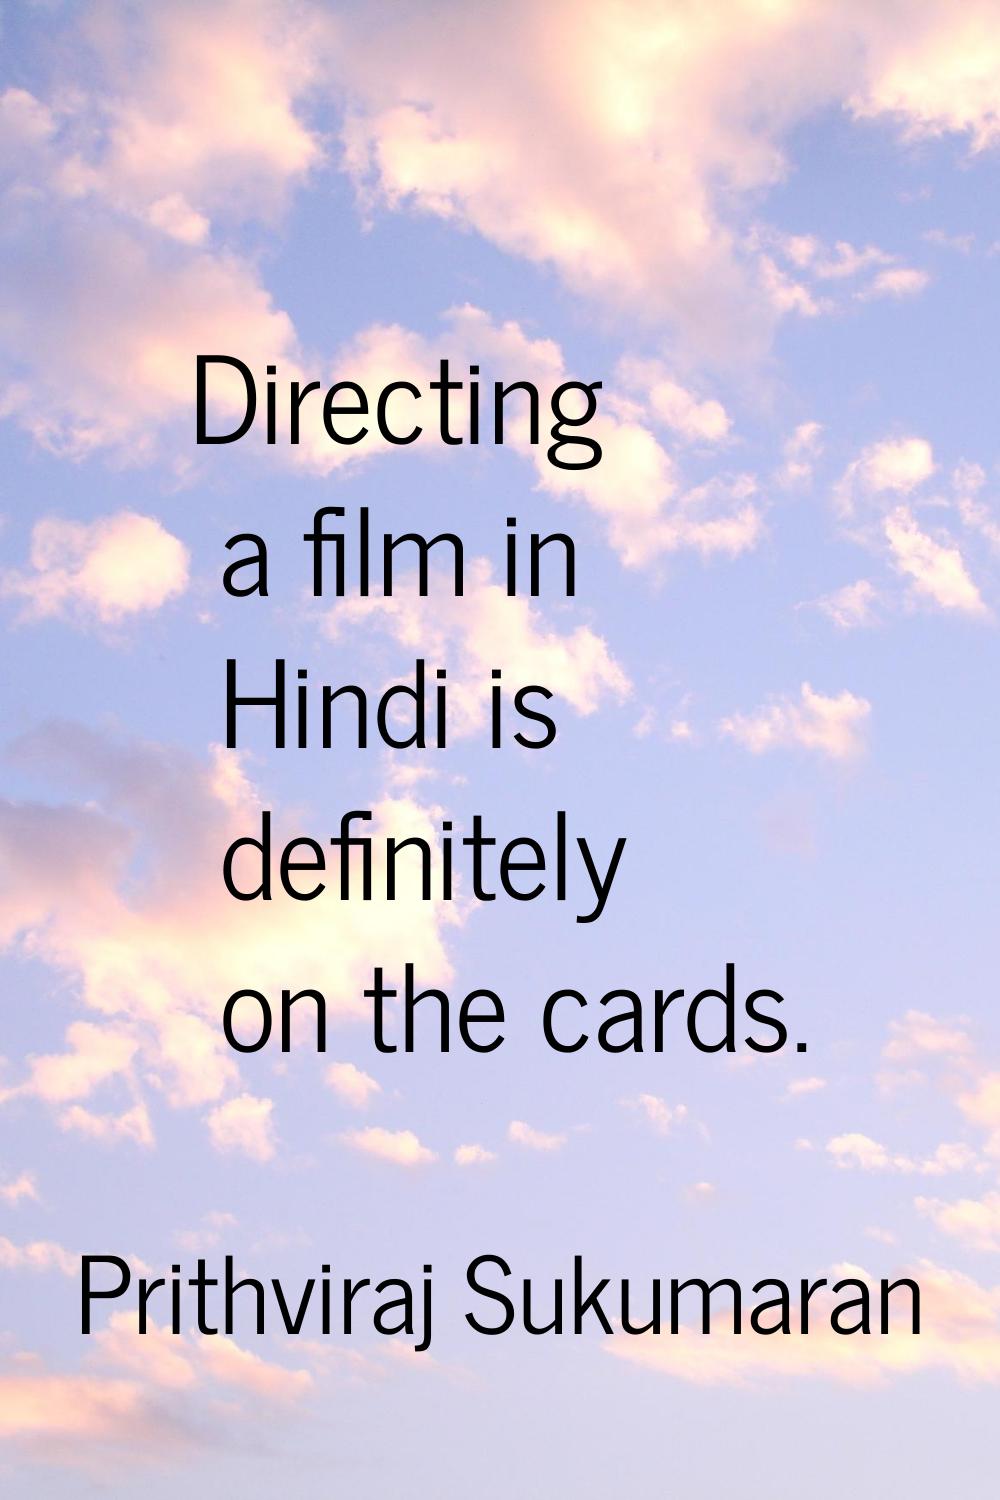 Directing a film in Hindi is definitely on the cards.